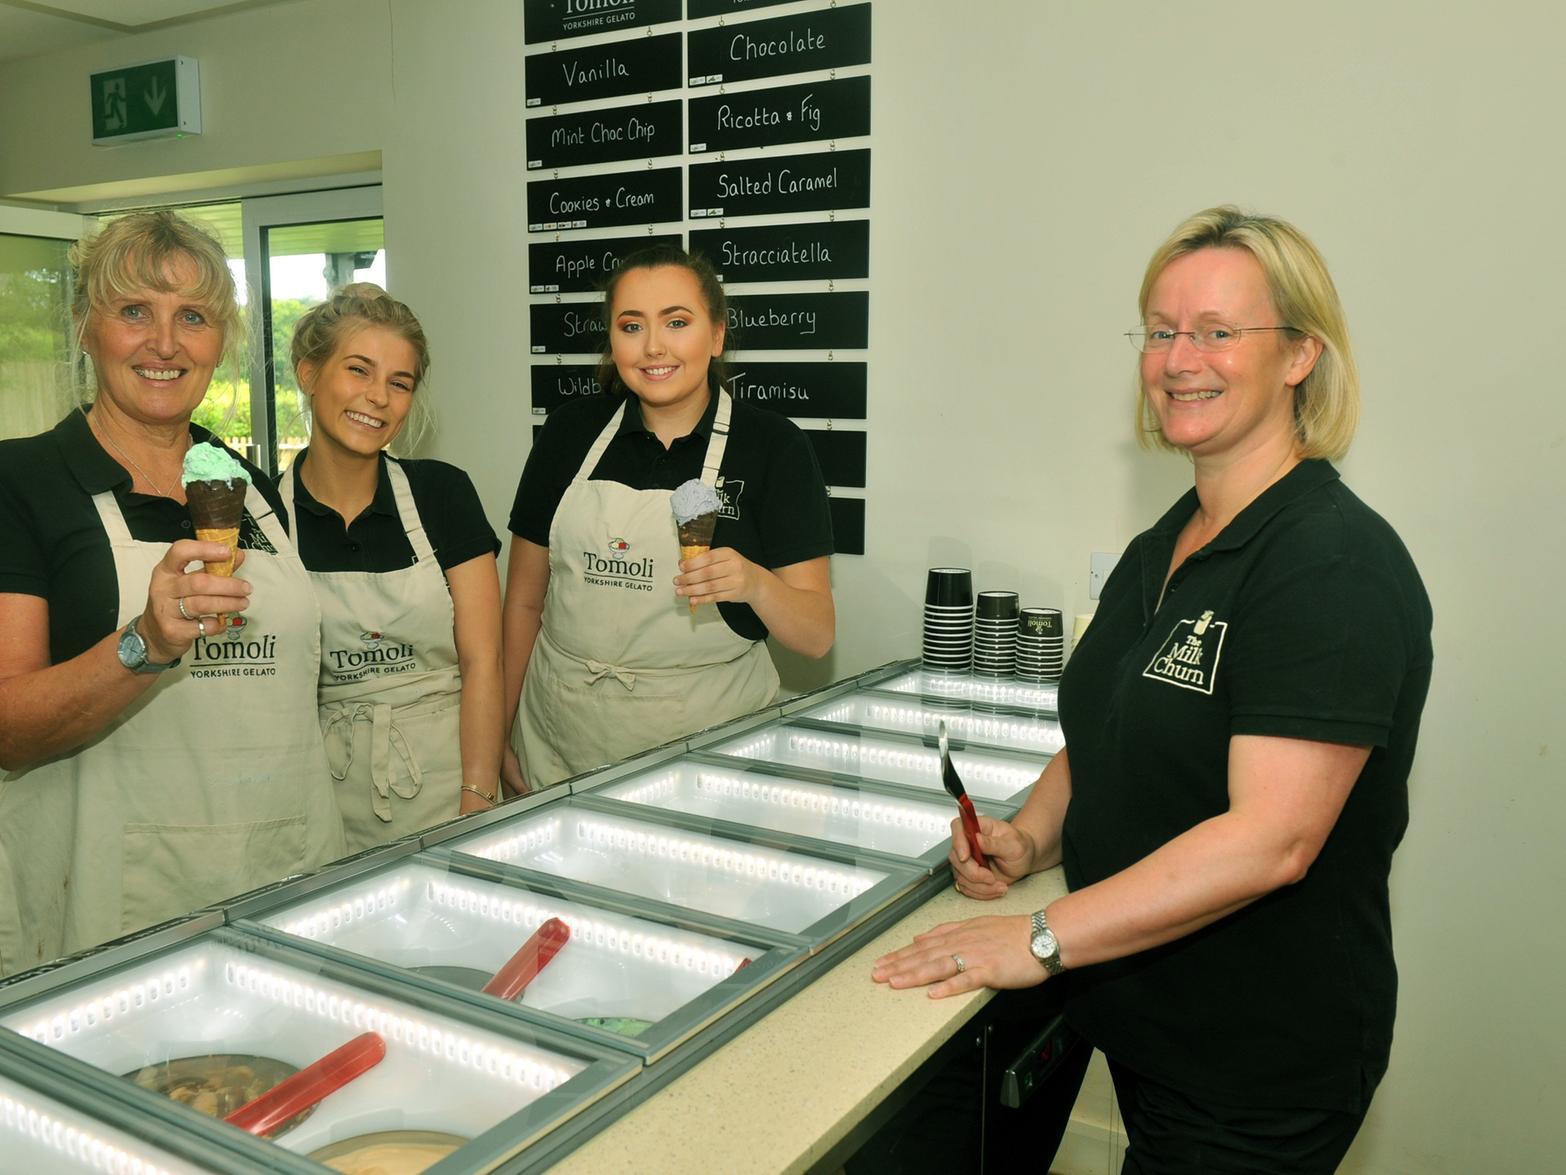 One reviewer said: 'A fab place developed by the farm owners to innovate the way it maximises dairy. The staff are always friendly and the quality of the ice cream is outstanding and they constantly experiment with flavours.'